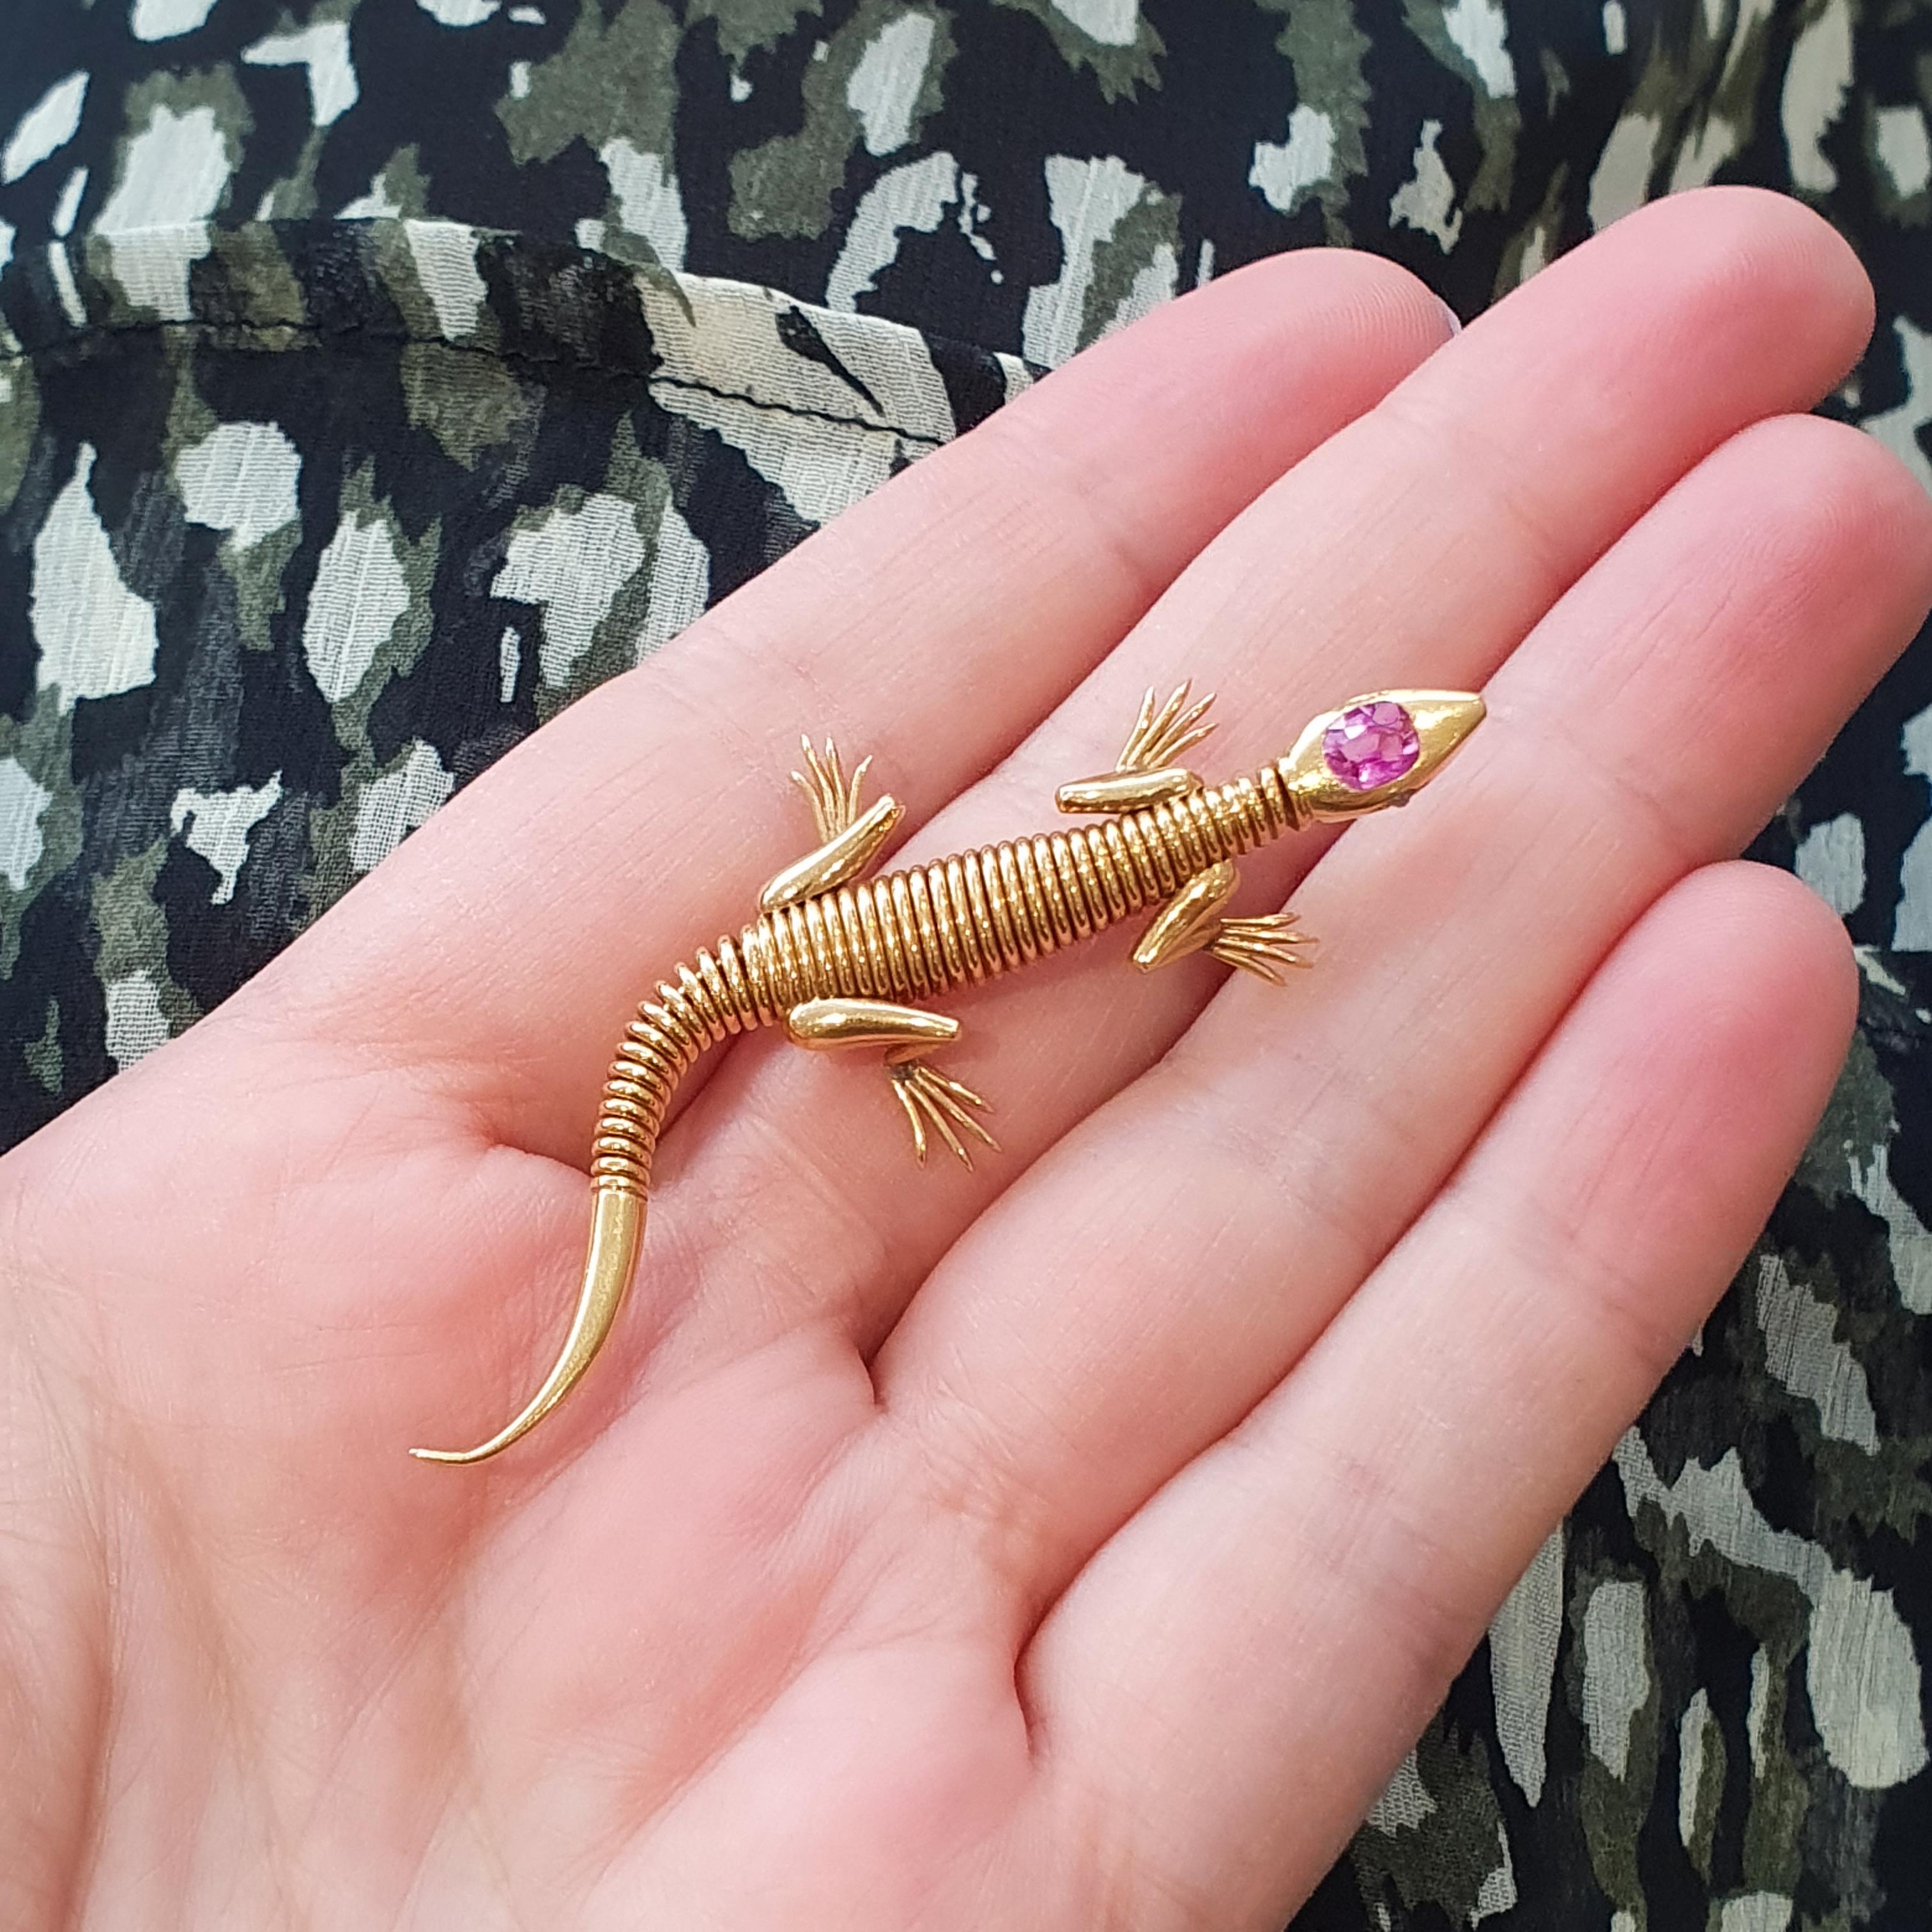 The Animal Lizard brooch clip in yellow gold 18k is a captivating piece of jewelry. This brooch features a lizard design, crafted with meticulous attention to detail.

The lizard’s eyes are adorned with rose cut diamonds, adding a touch of sparkle